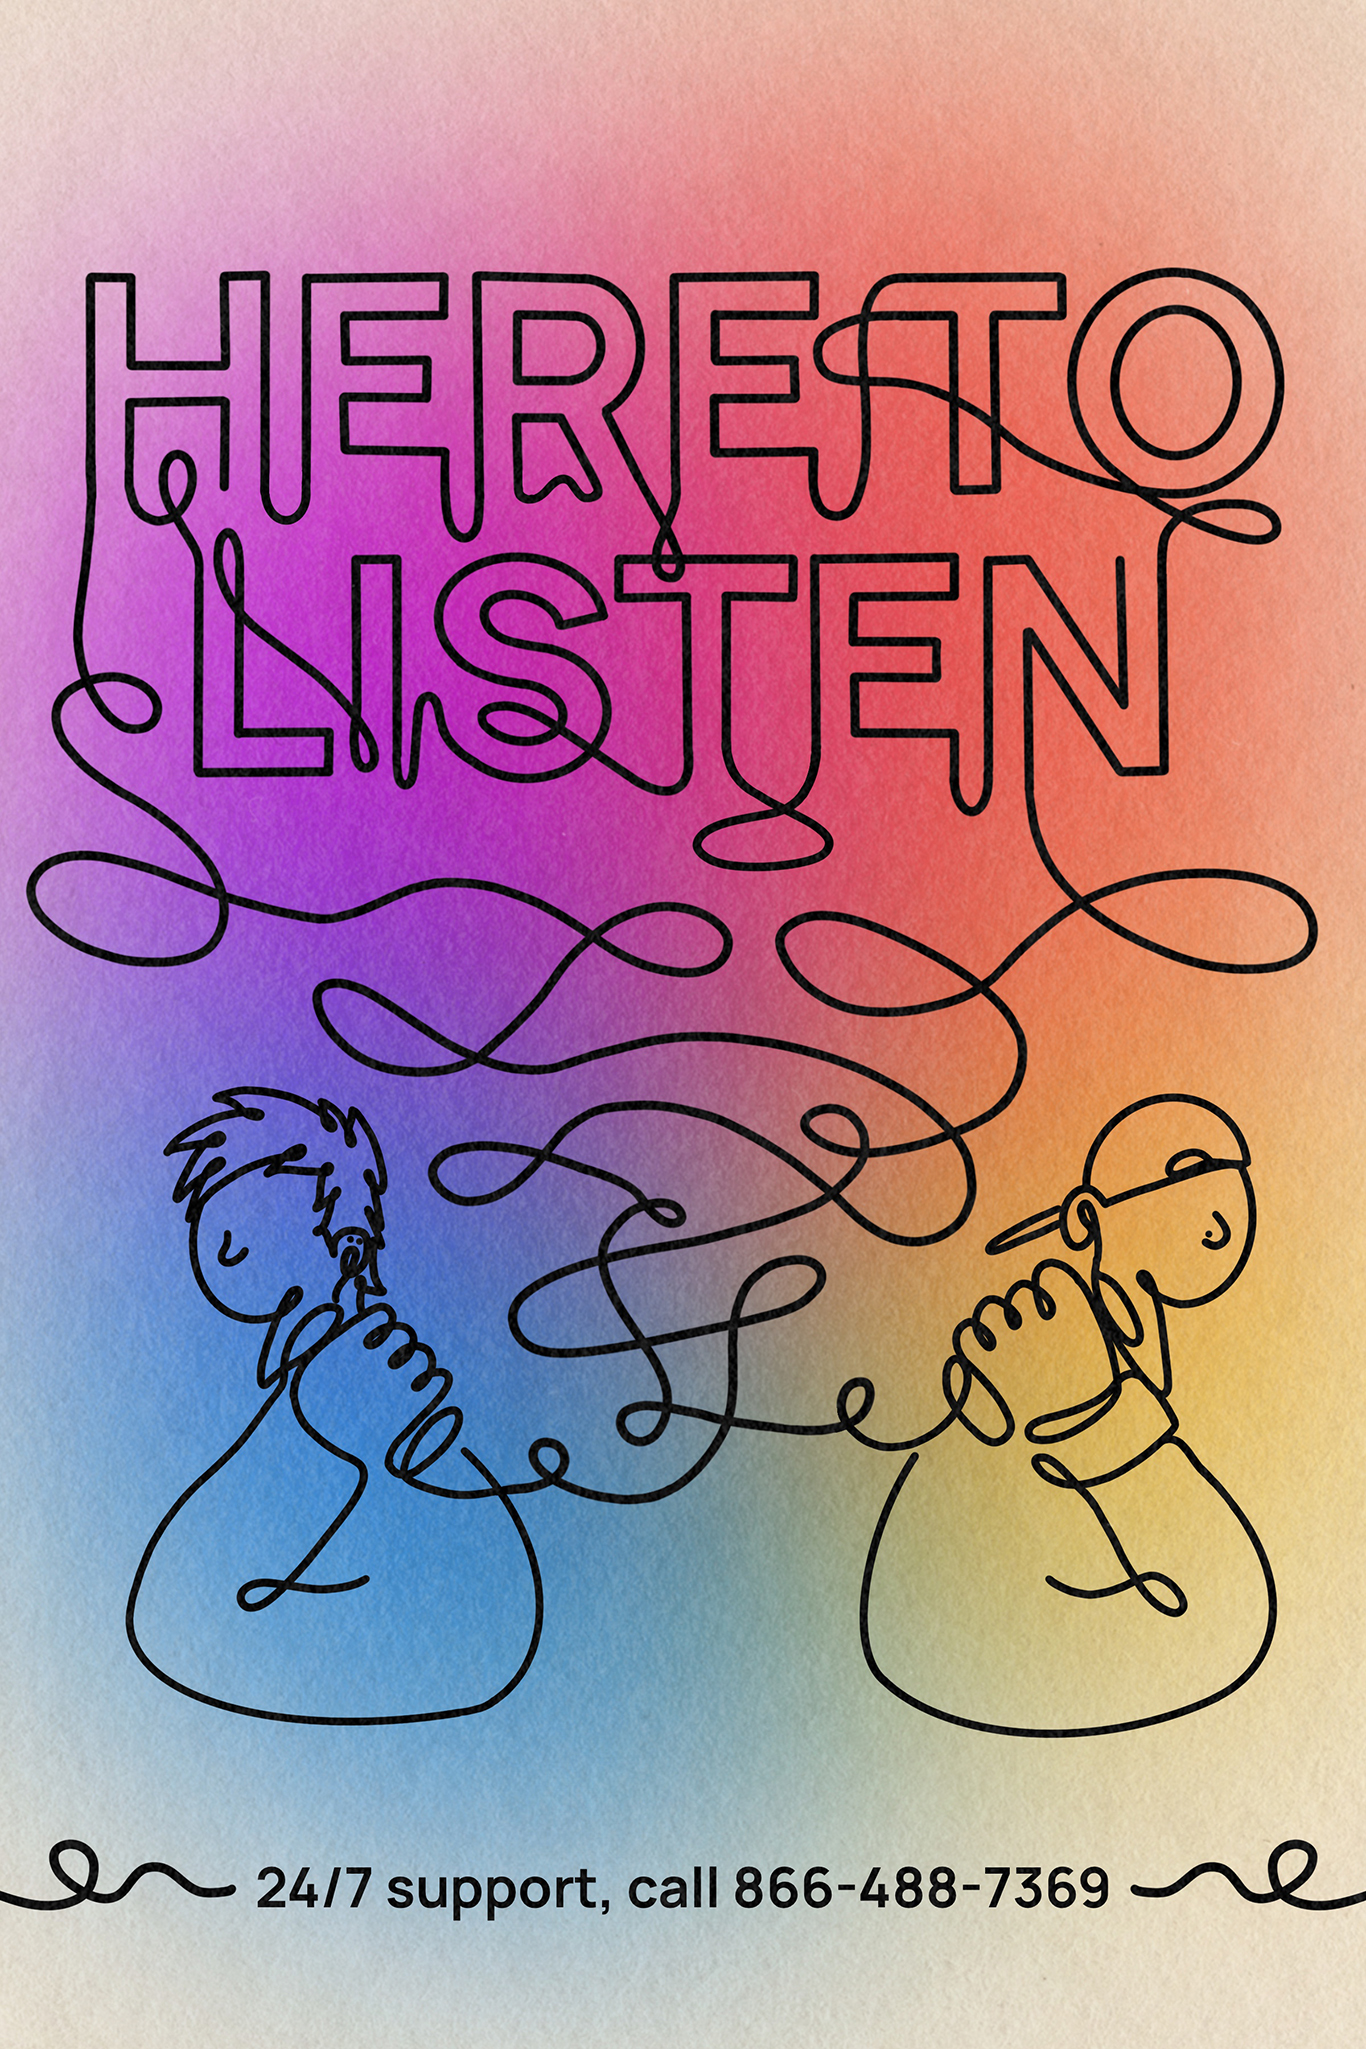 A rainbow colored poster with black line drawings that show two people on the phone and link to black text which reads “here to listen” and “24/7 support, call 866-488-7369”.